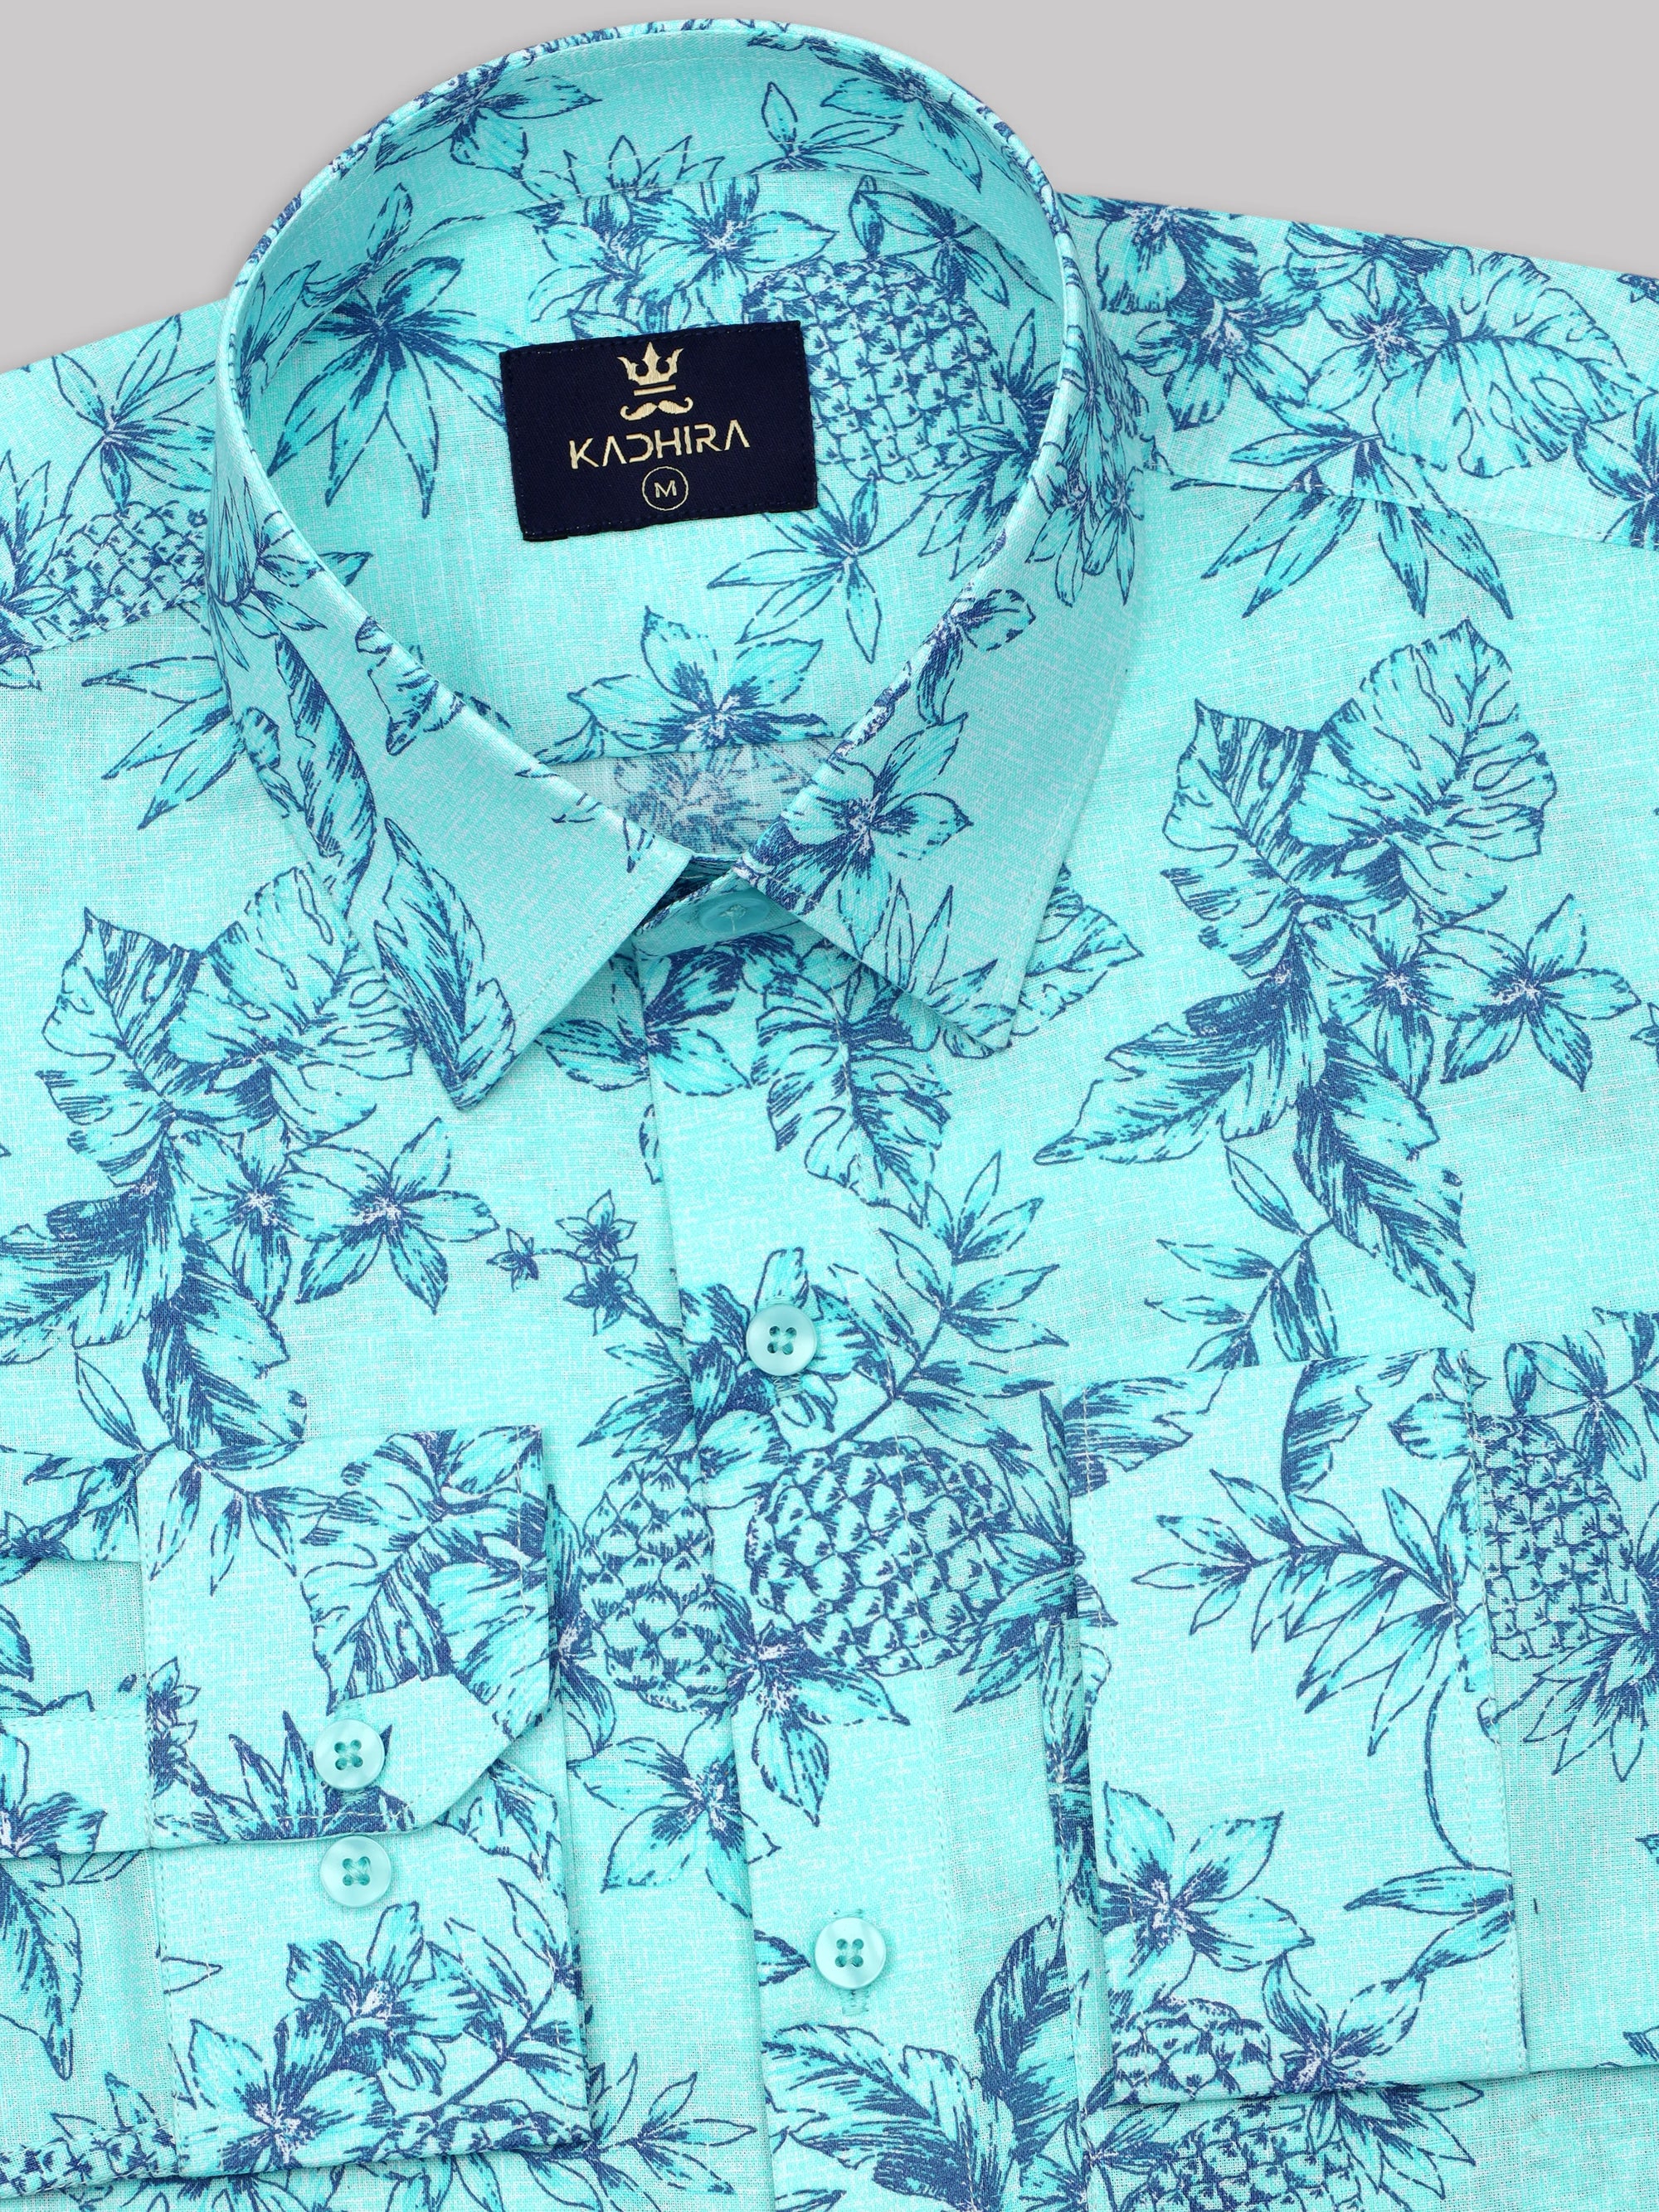 Tiffany Blue With Navy Blue Pineapple Printed Premium Cotton Shirt